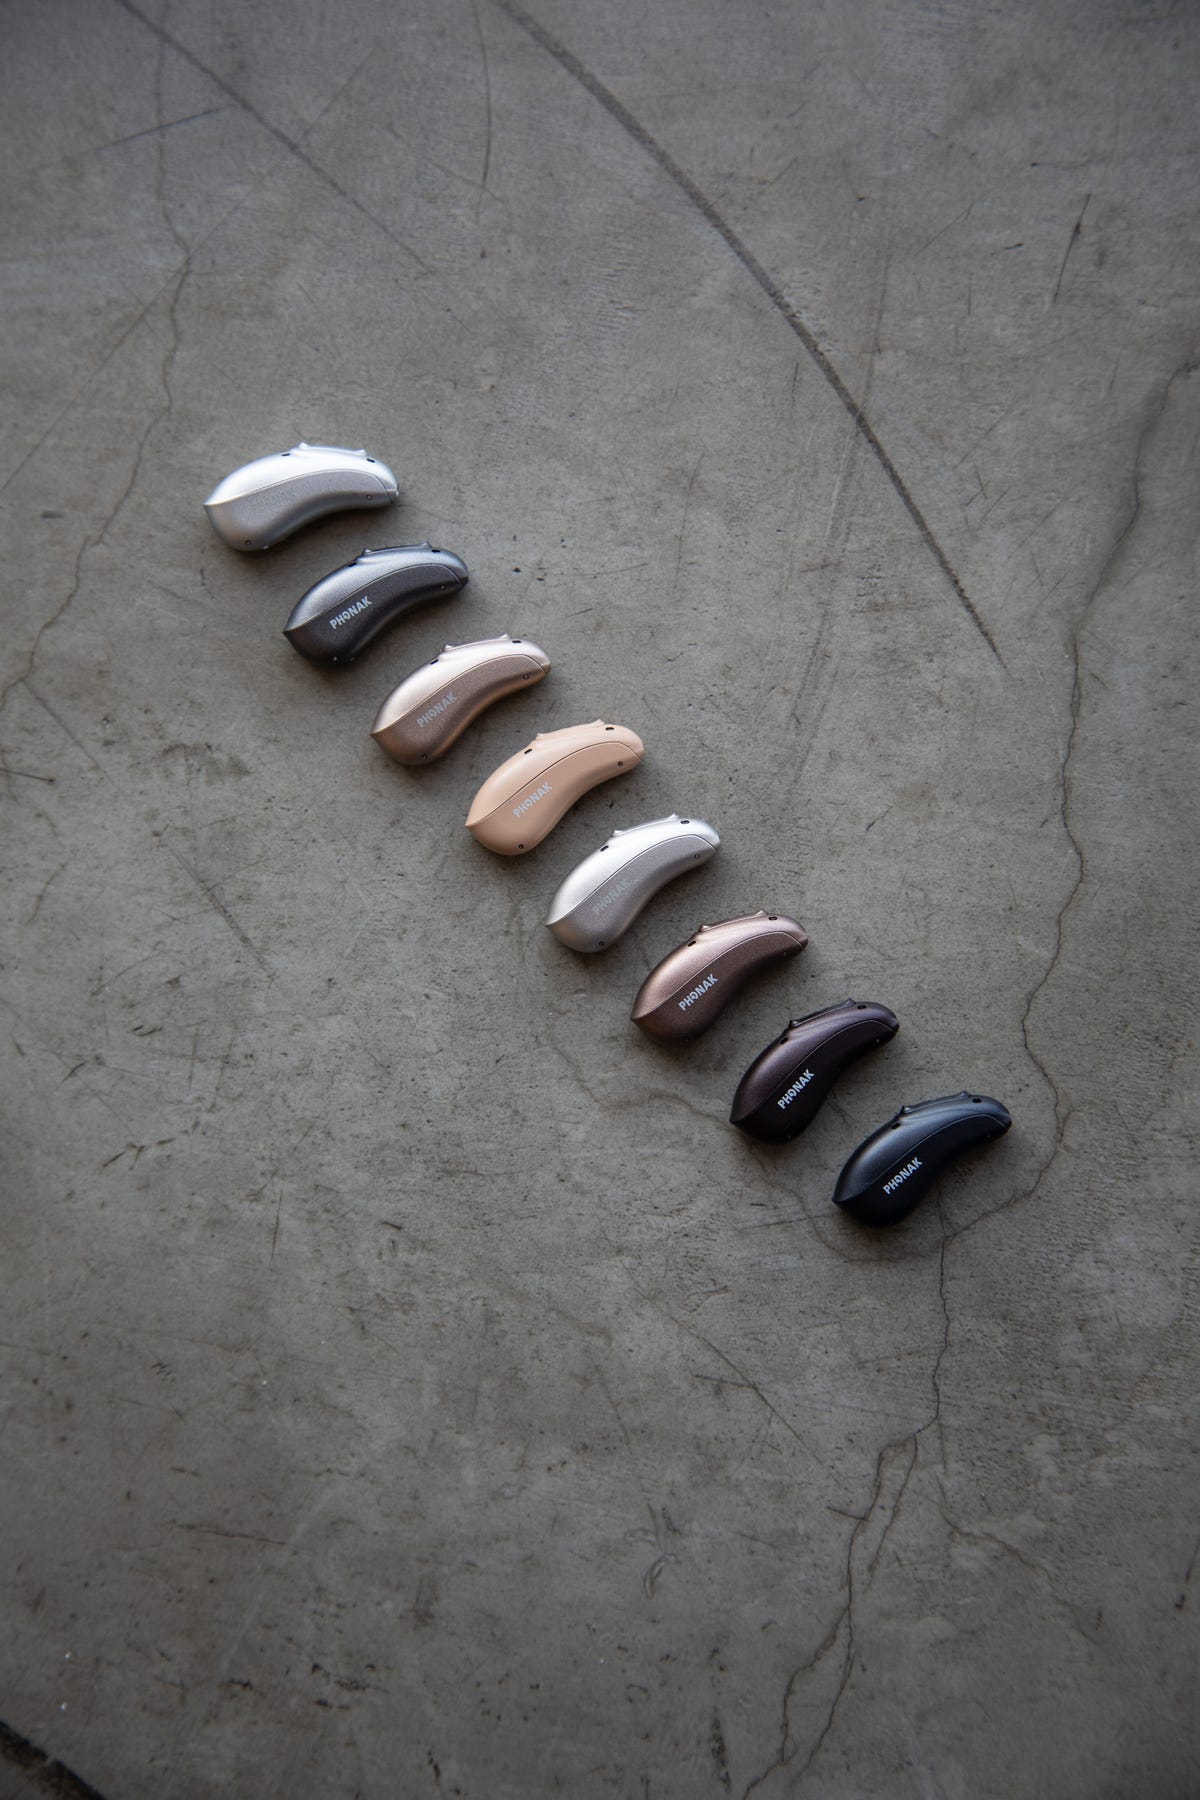 A handful of hearing aids in different colors lined up 